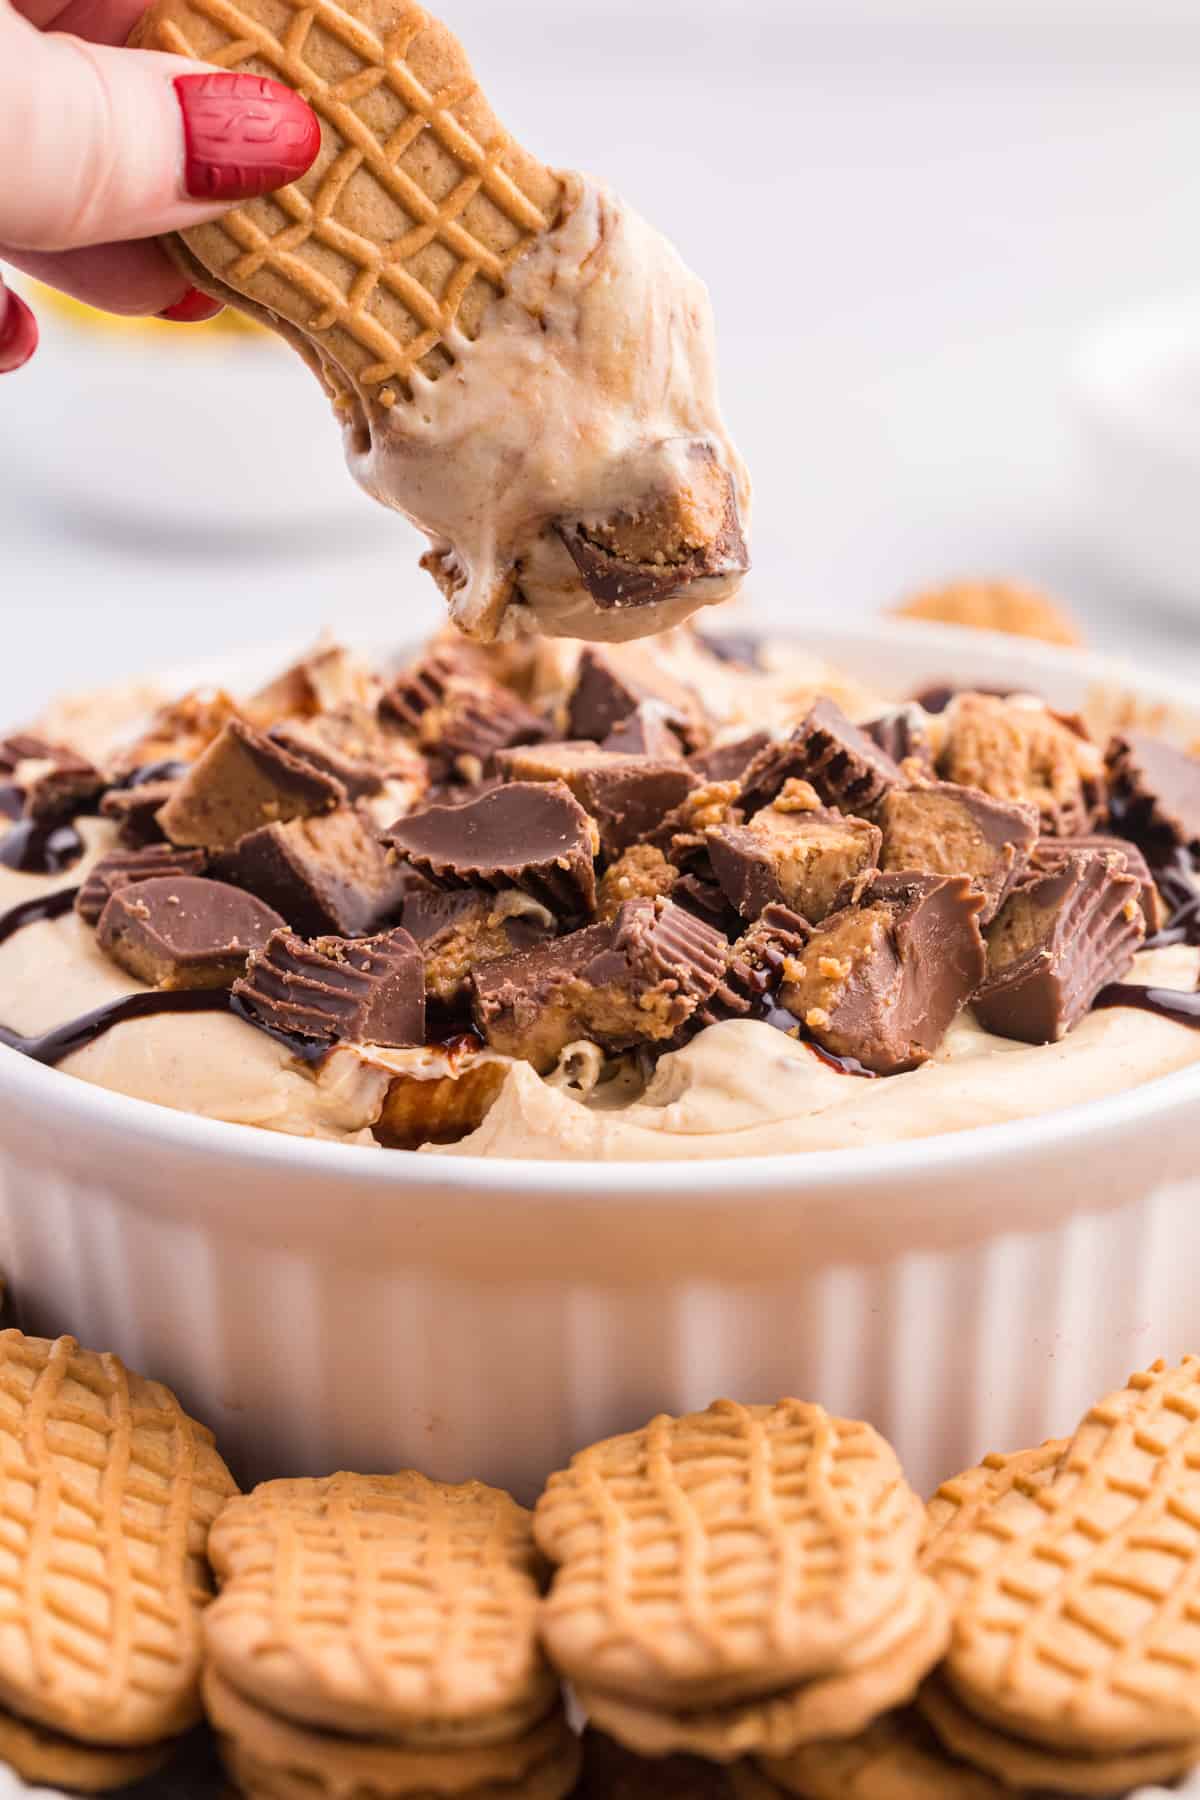 Hand reaching in and dipping Nutter Butter cookie in peanut butter cheesecake dessert dip.